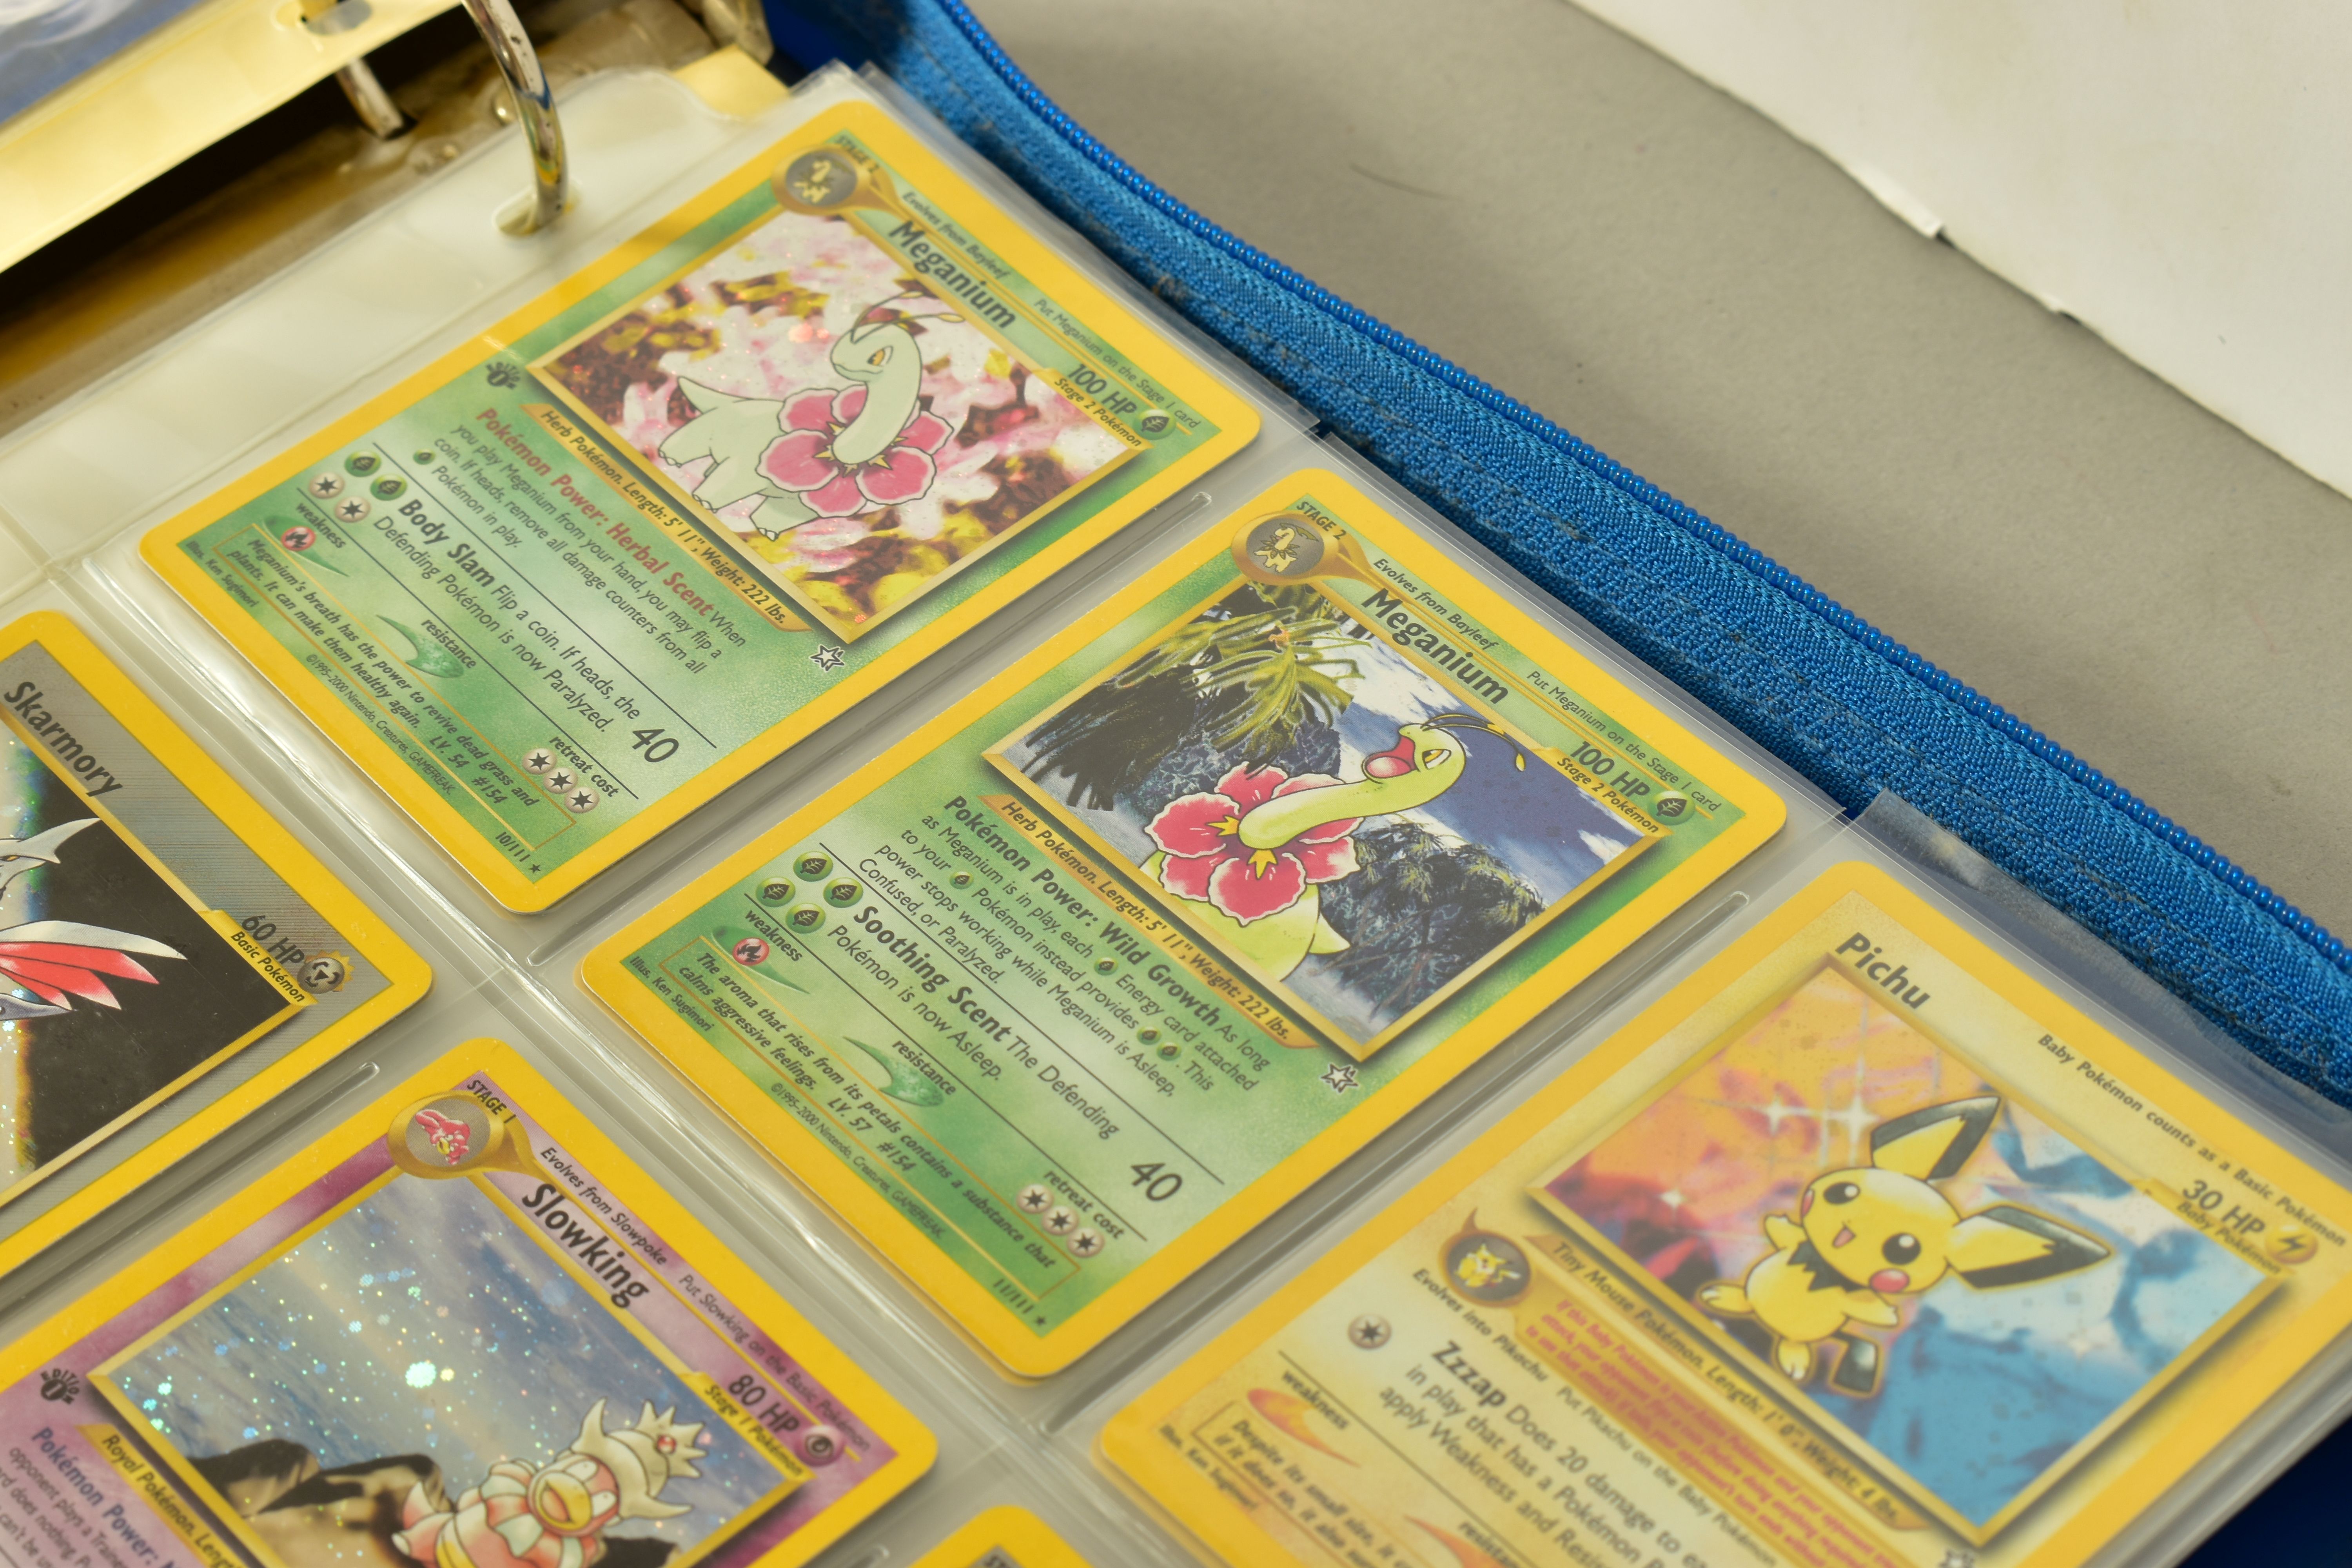 THE COMPLETE POKEMON CARD NEO GENESIS AND NEO DISCOVERY SETS, containing many first edition cards. - Image 6 of 32